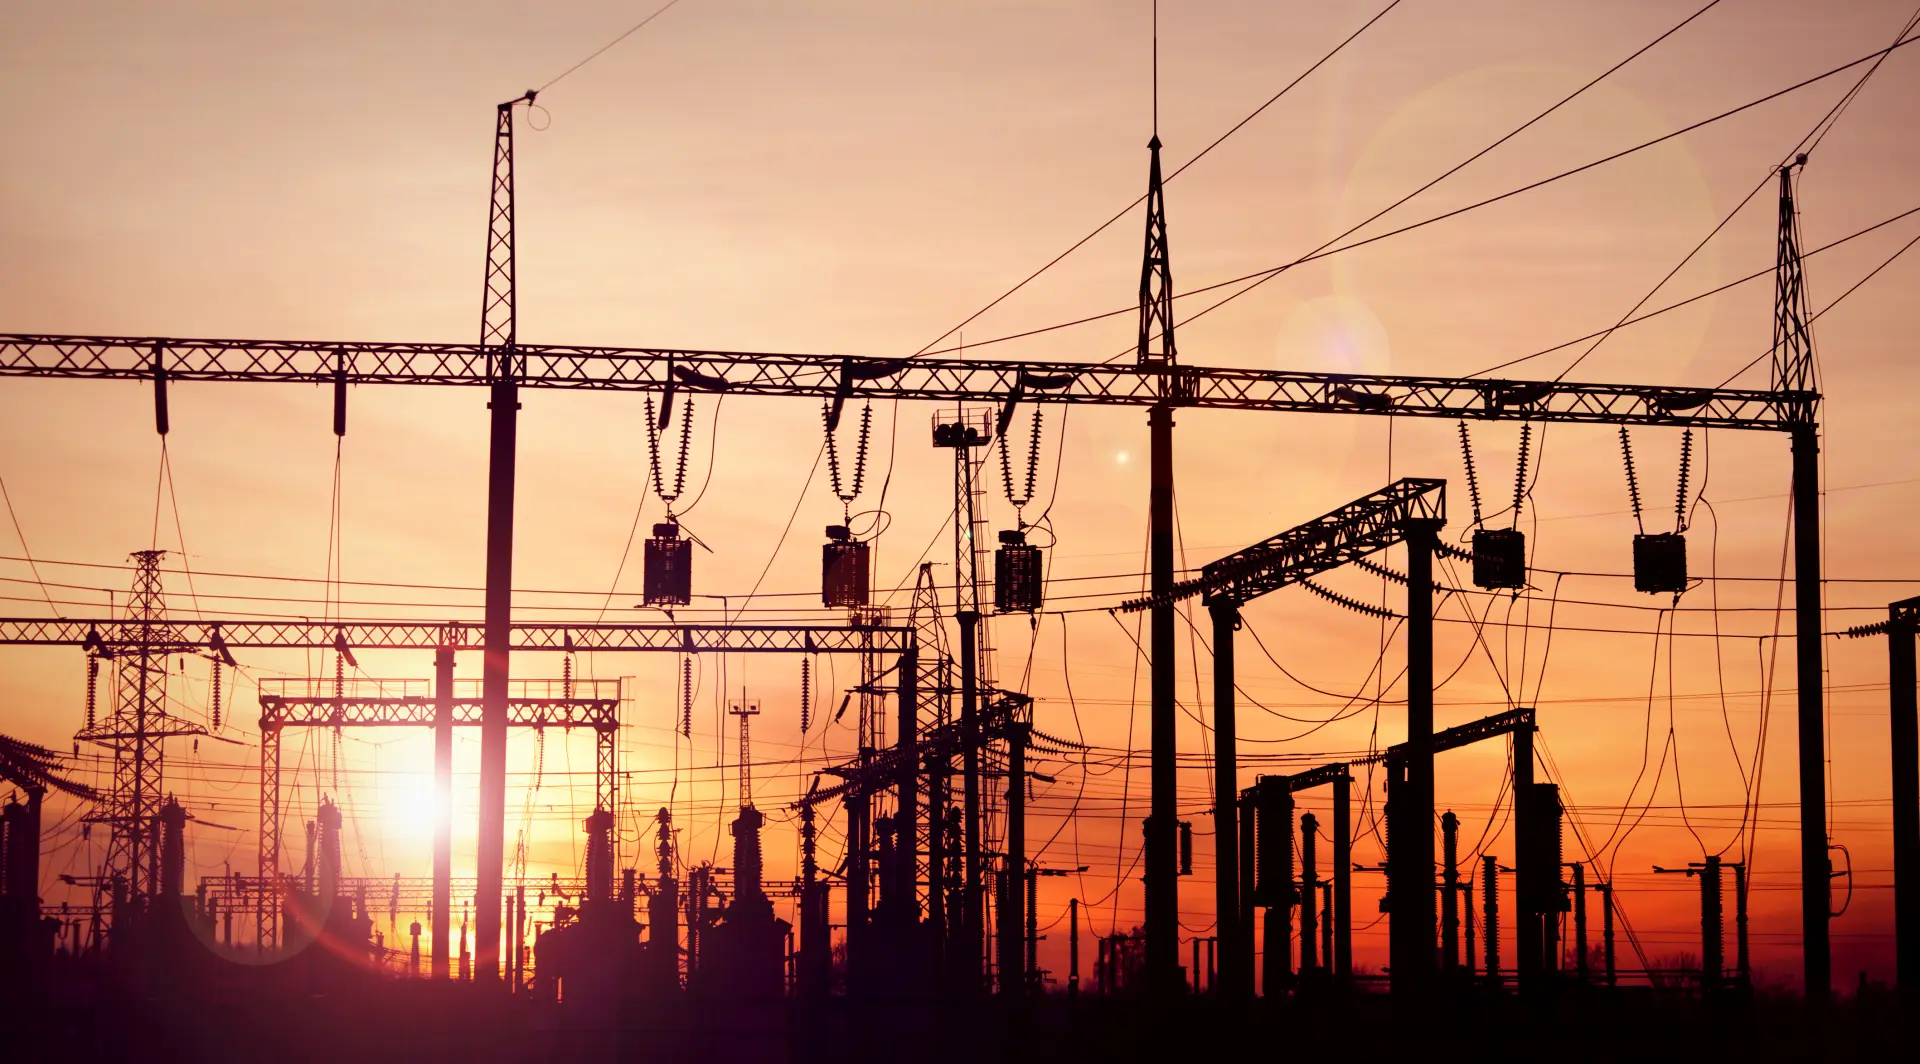 Electric Power Substation at Sunset